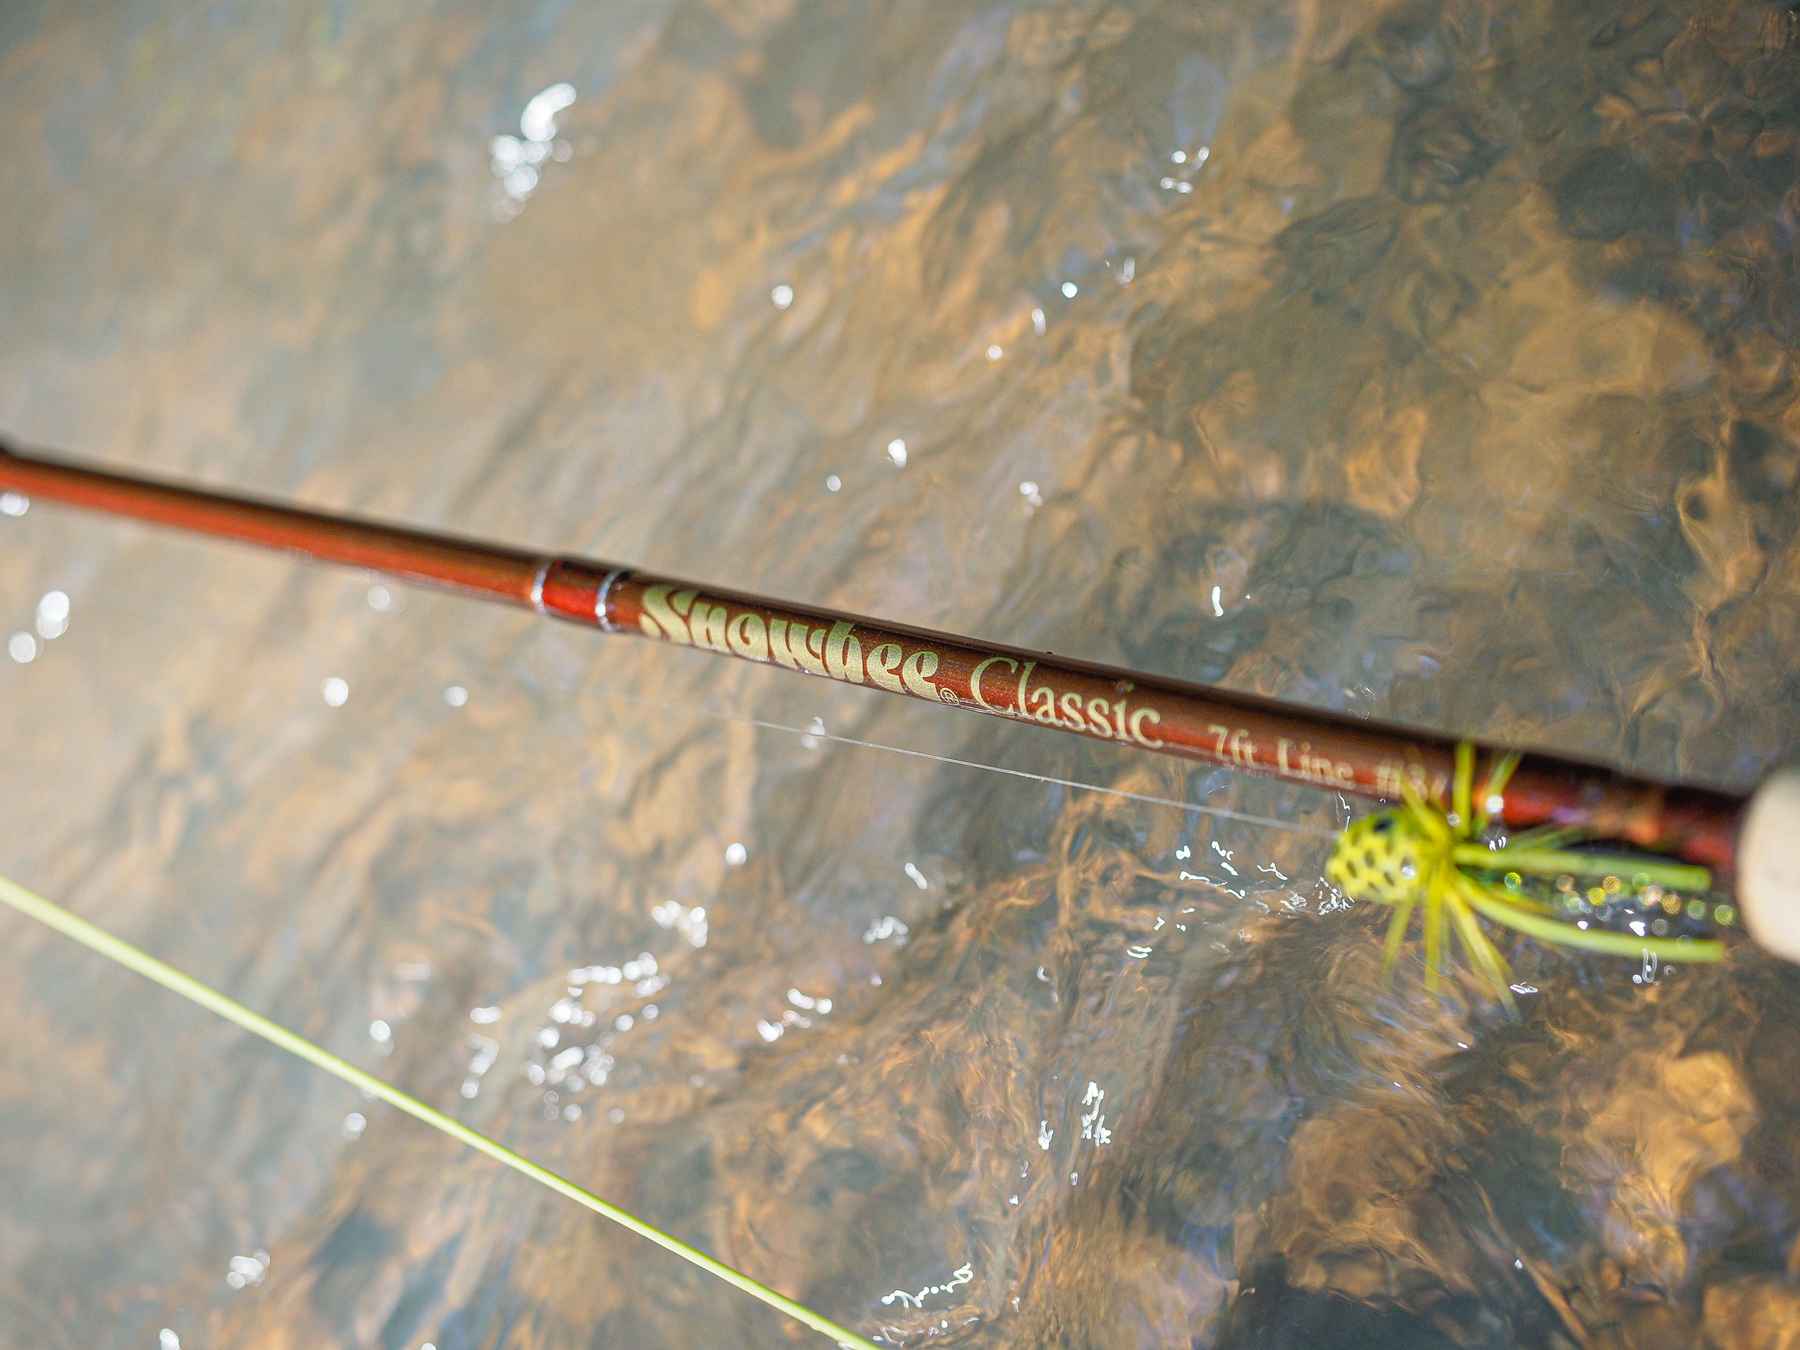 Snowbee Classic Fly Fishing Combi Kit 9'  7-8 # model with line 